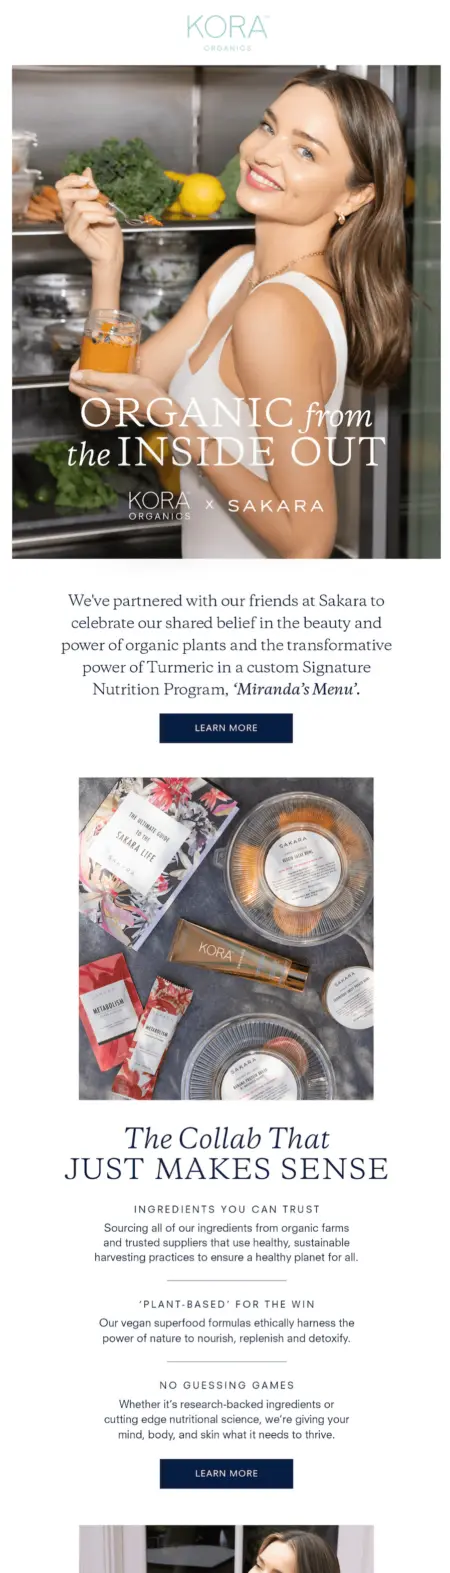 Image shows an email newsletter collaboration between skincare brand KORA Organics and organic meal delivery brand Sakara, announcing and explaining how the two brands came together in partnership. The featured image is a model applying makeup against a backdrop of an open refrigerator where fresh produce sits on the shelves. The headline reads, “Organic from the inside out,” and the body copy introduces the new collab: Miranda’s Menu.